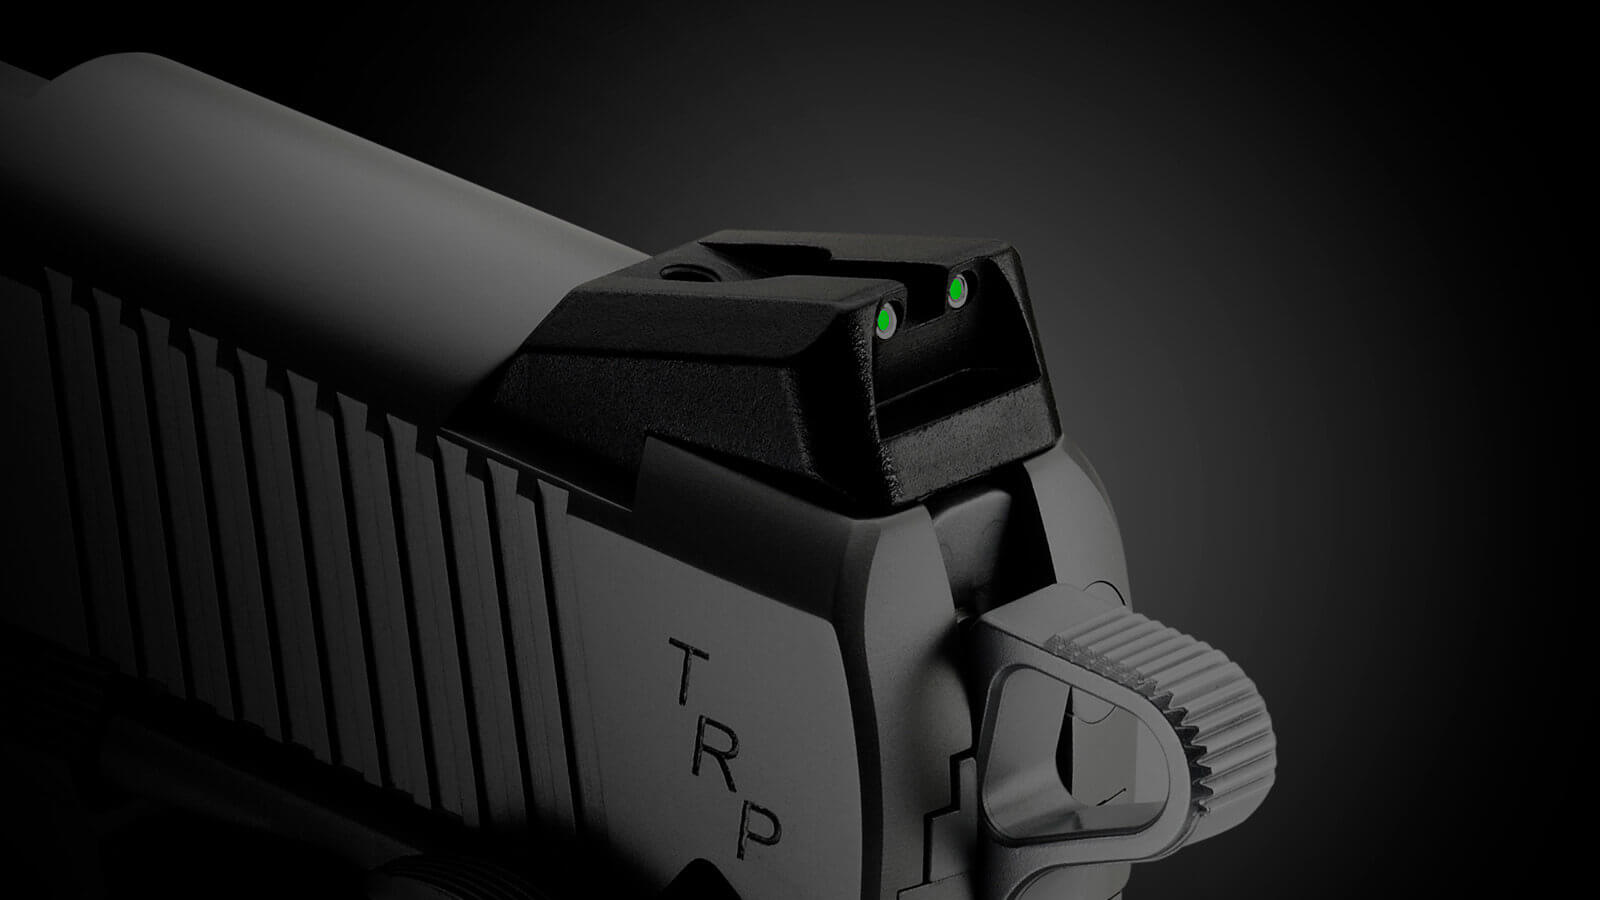 This is a photo of night sights on a Springfield Armory M1911 pistol. They can help with target acquisition and sight alignment in low light conditions. For a custom 1911, they may be standard. However, for a GI Mil-Spec pistol, night sights aren't usually included. Adding them is easier than a trigger job, replacing the hammer, upgrading the mainspring or polishing the feed ramp.